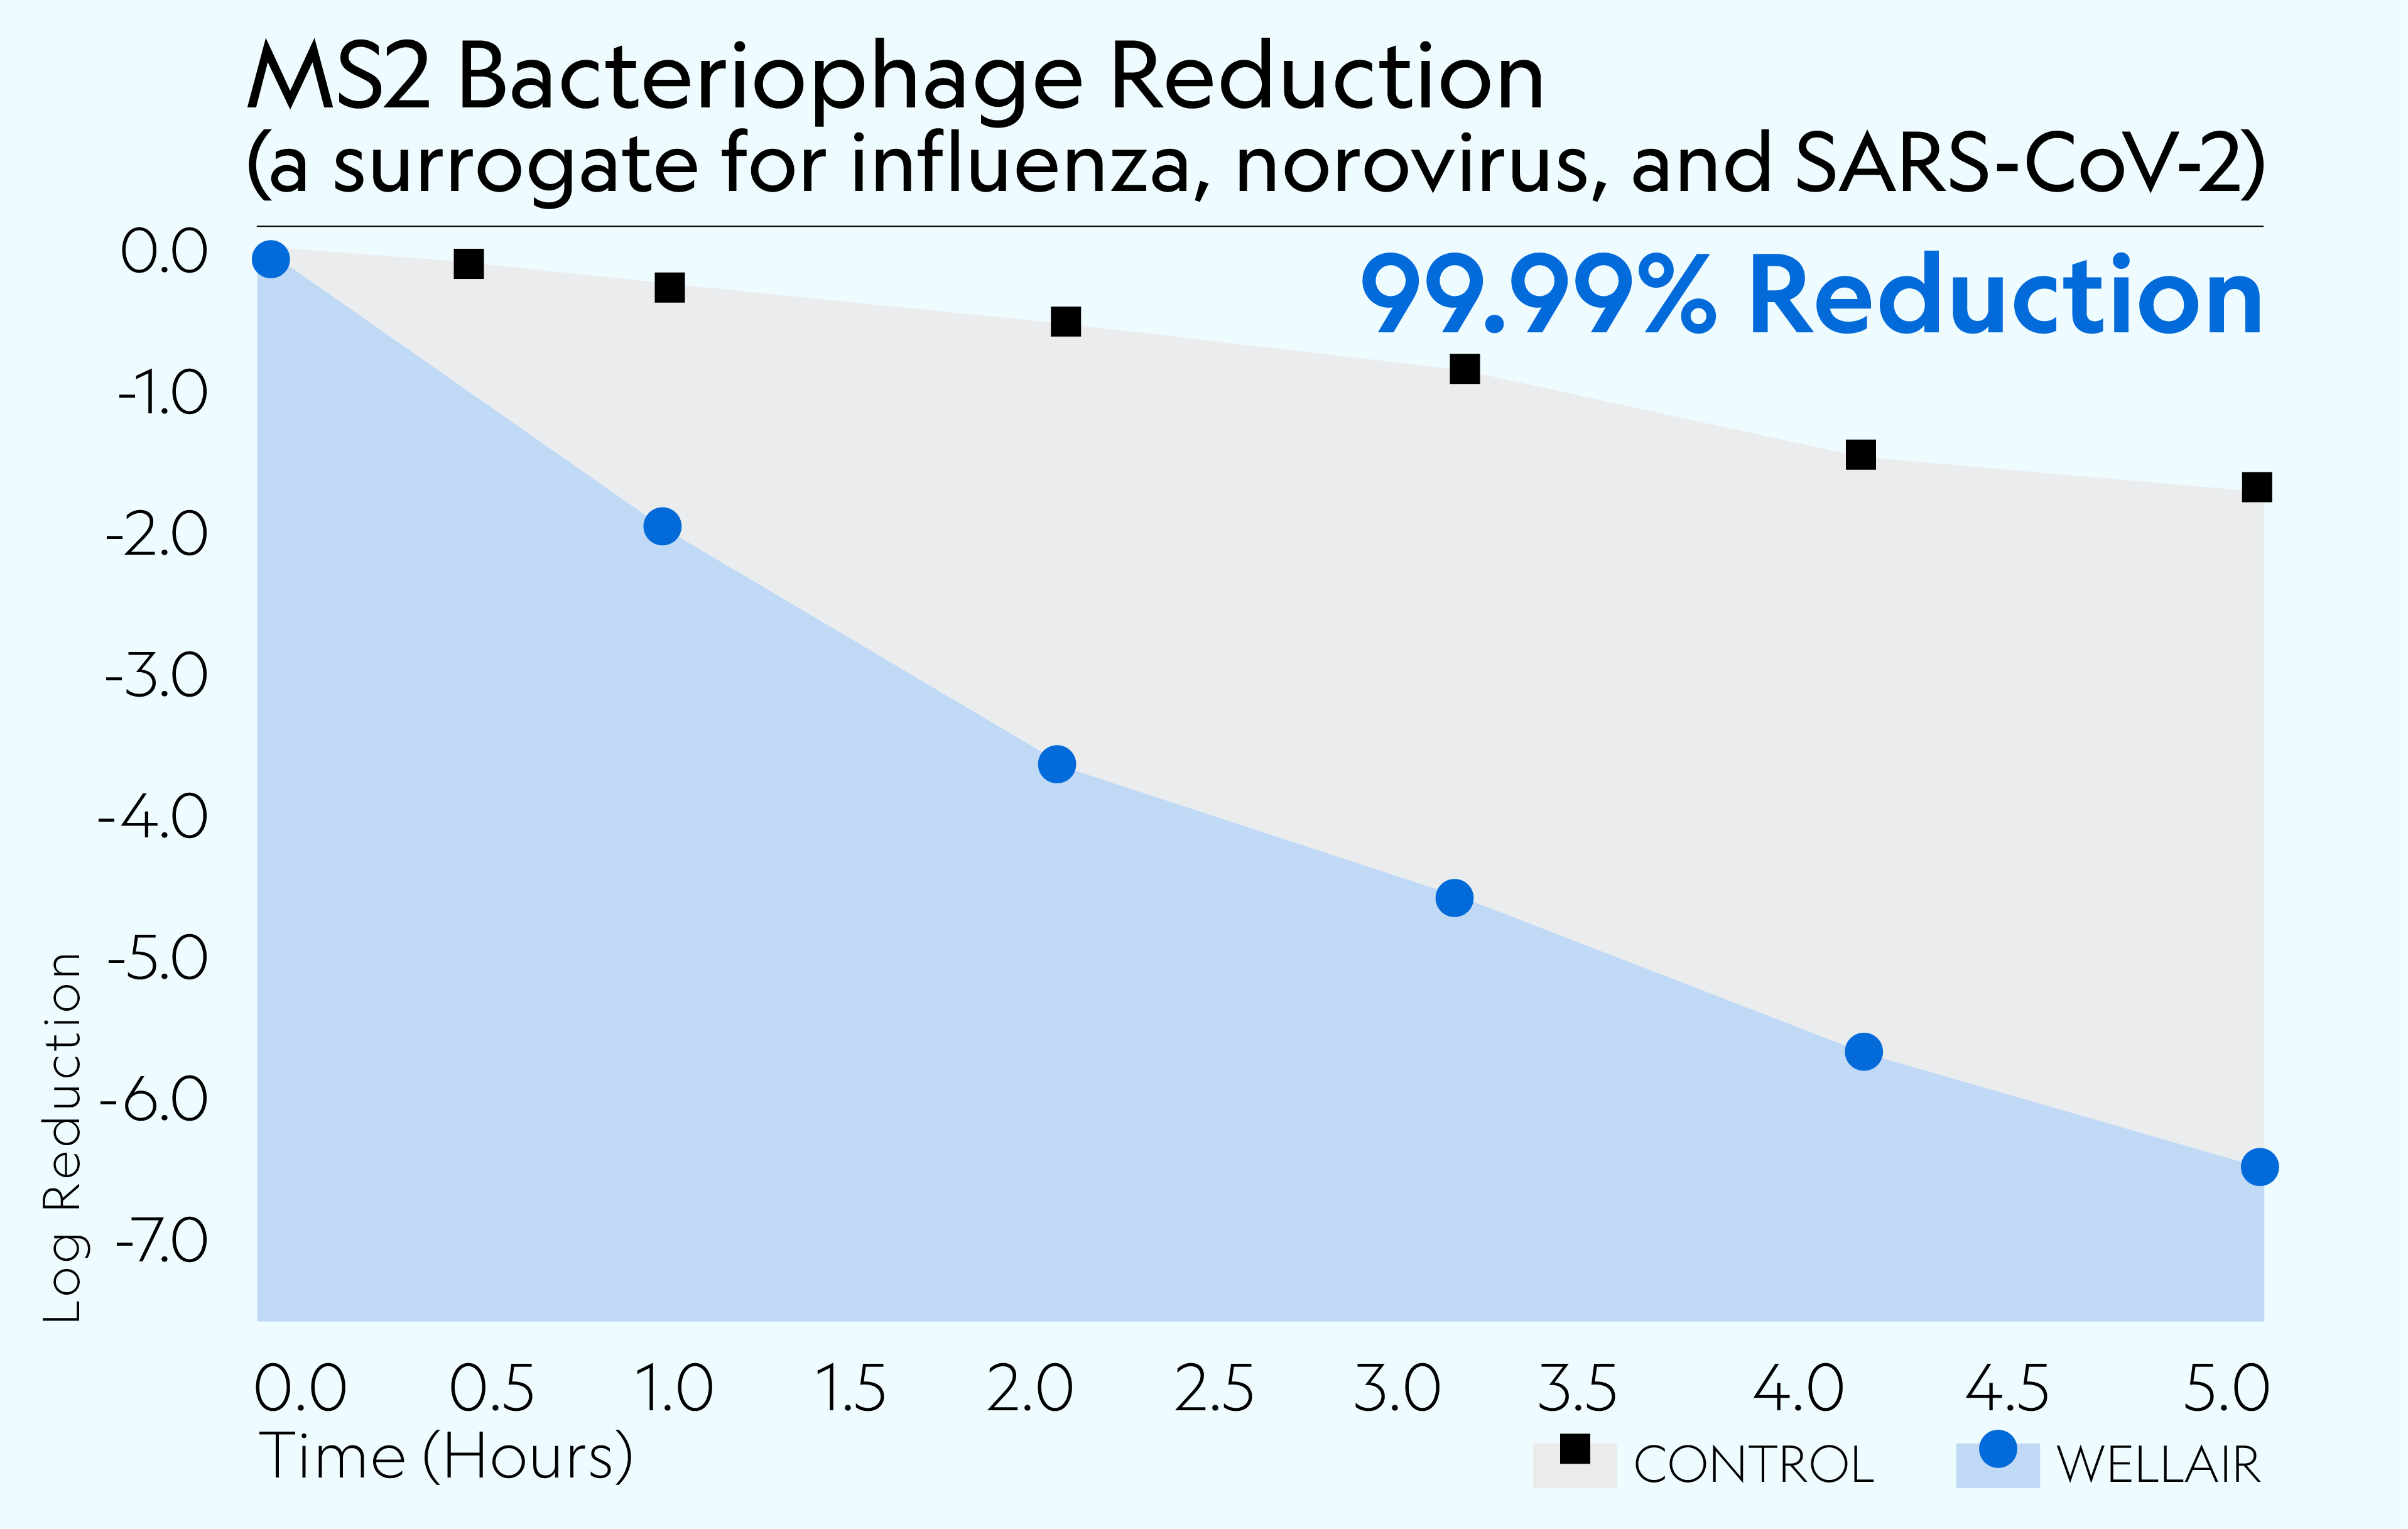 Protect 800/900 achieved 99.99% reduction of MS2 Bacteriophage